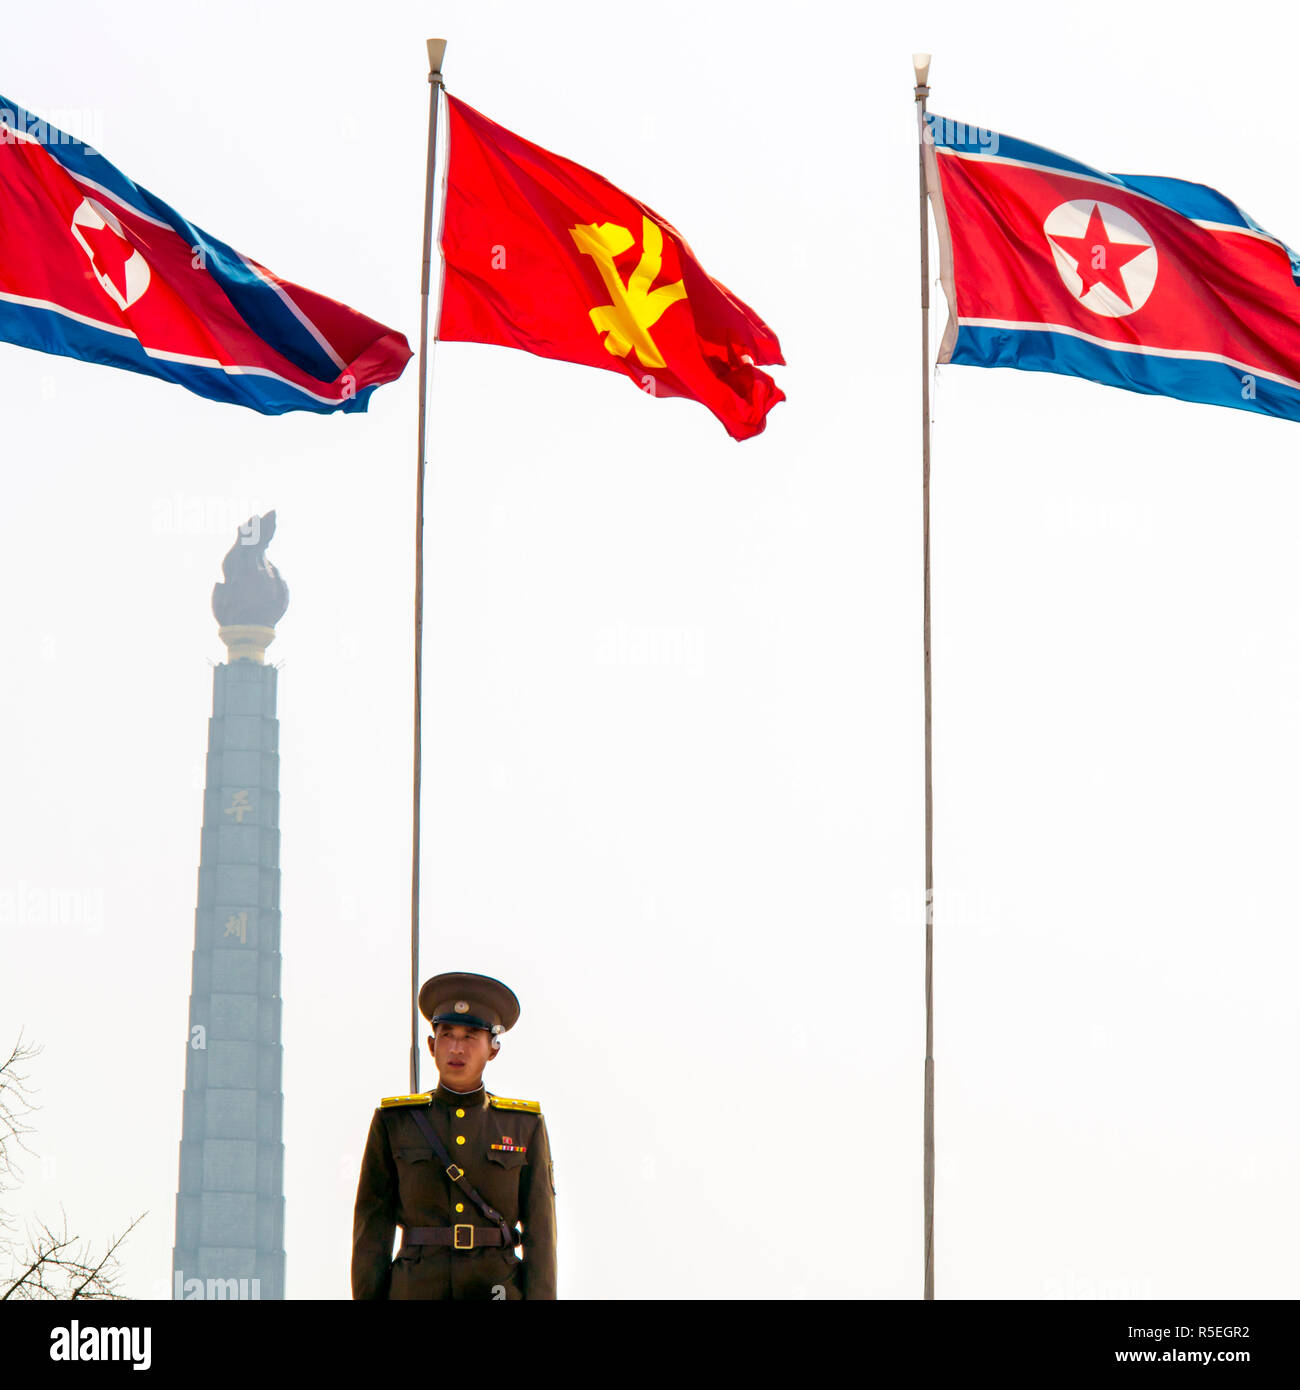 Democratic Peoples's Republic of Korea (DPRK), North Korea, Pyongyang, Juche Tower (symbol of the Juche Idea, penned by Kim Il Sung) Stock Photo